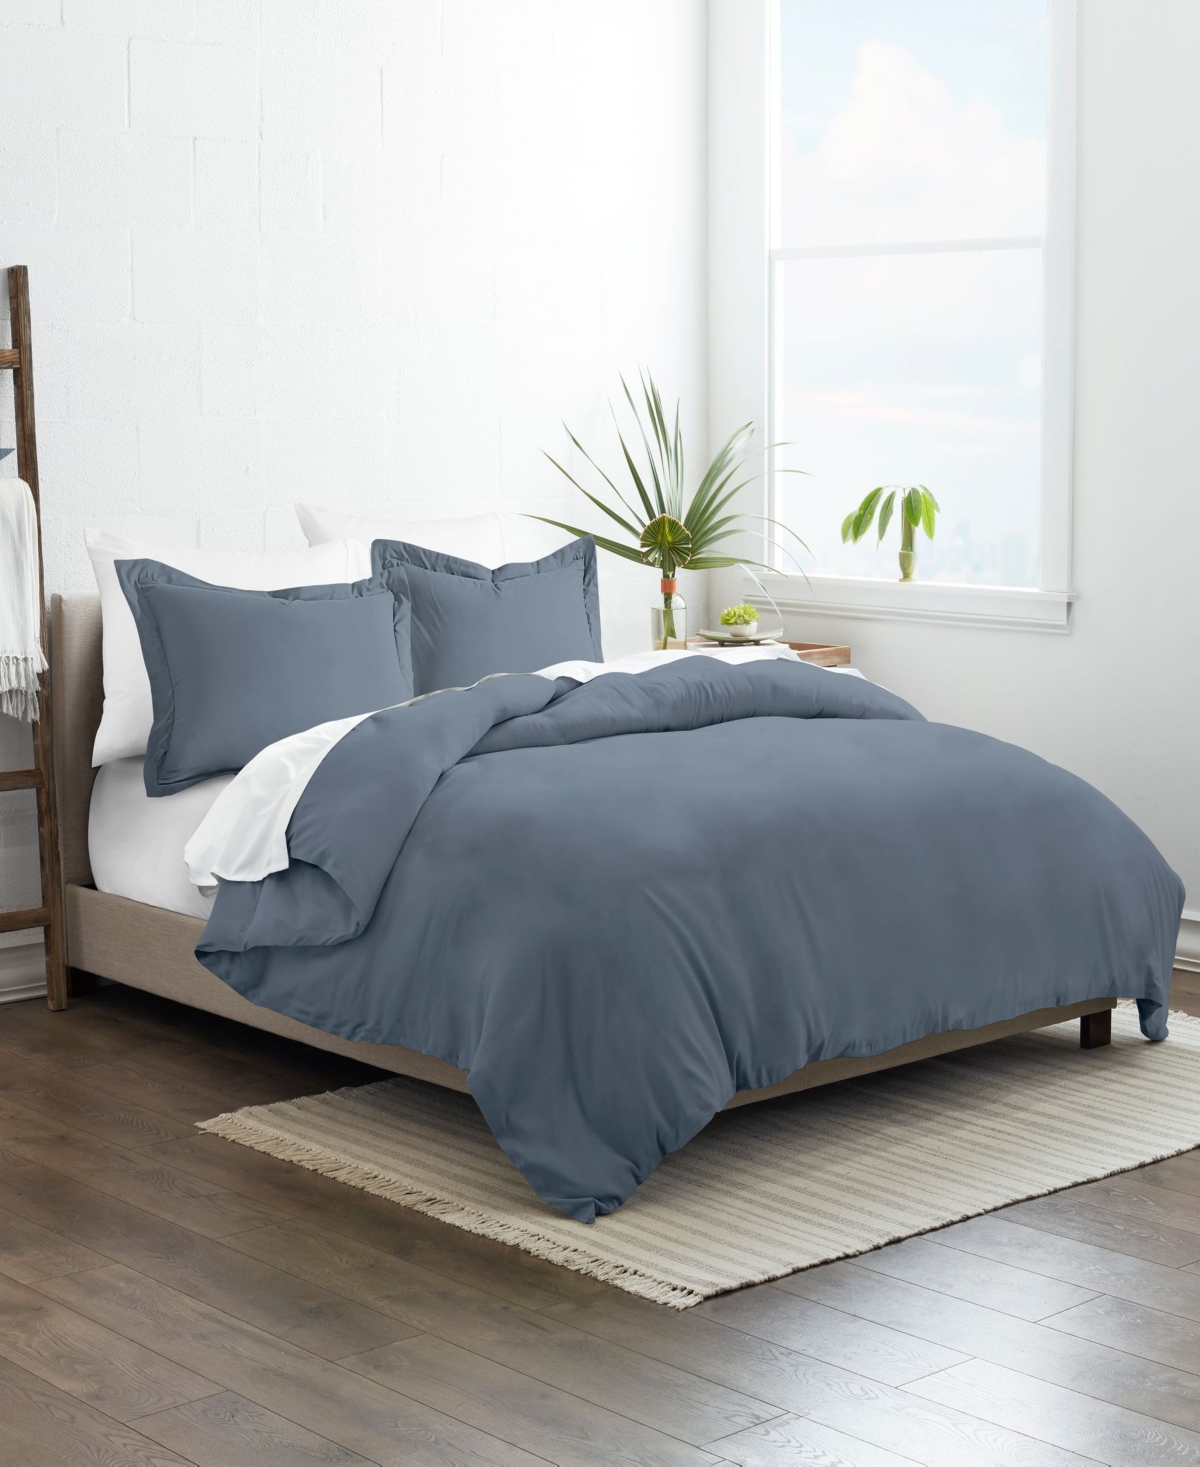 Ienjoy Home Dynamically Dashing Duvet Cover Set By The Home Collection, King/california King In Stone